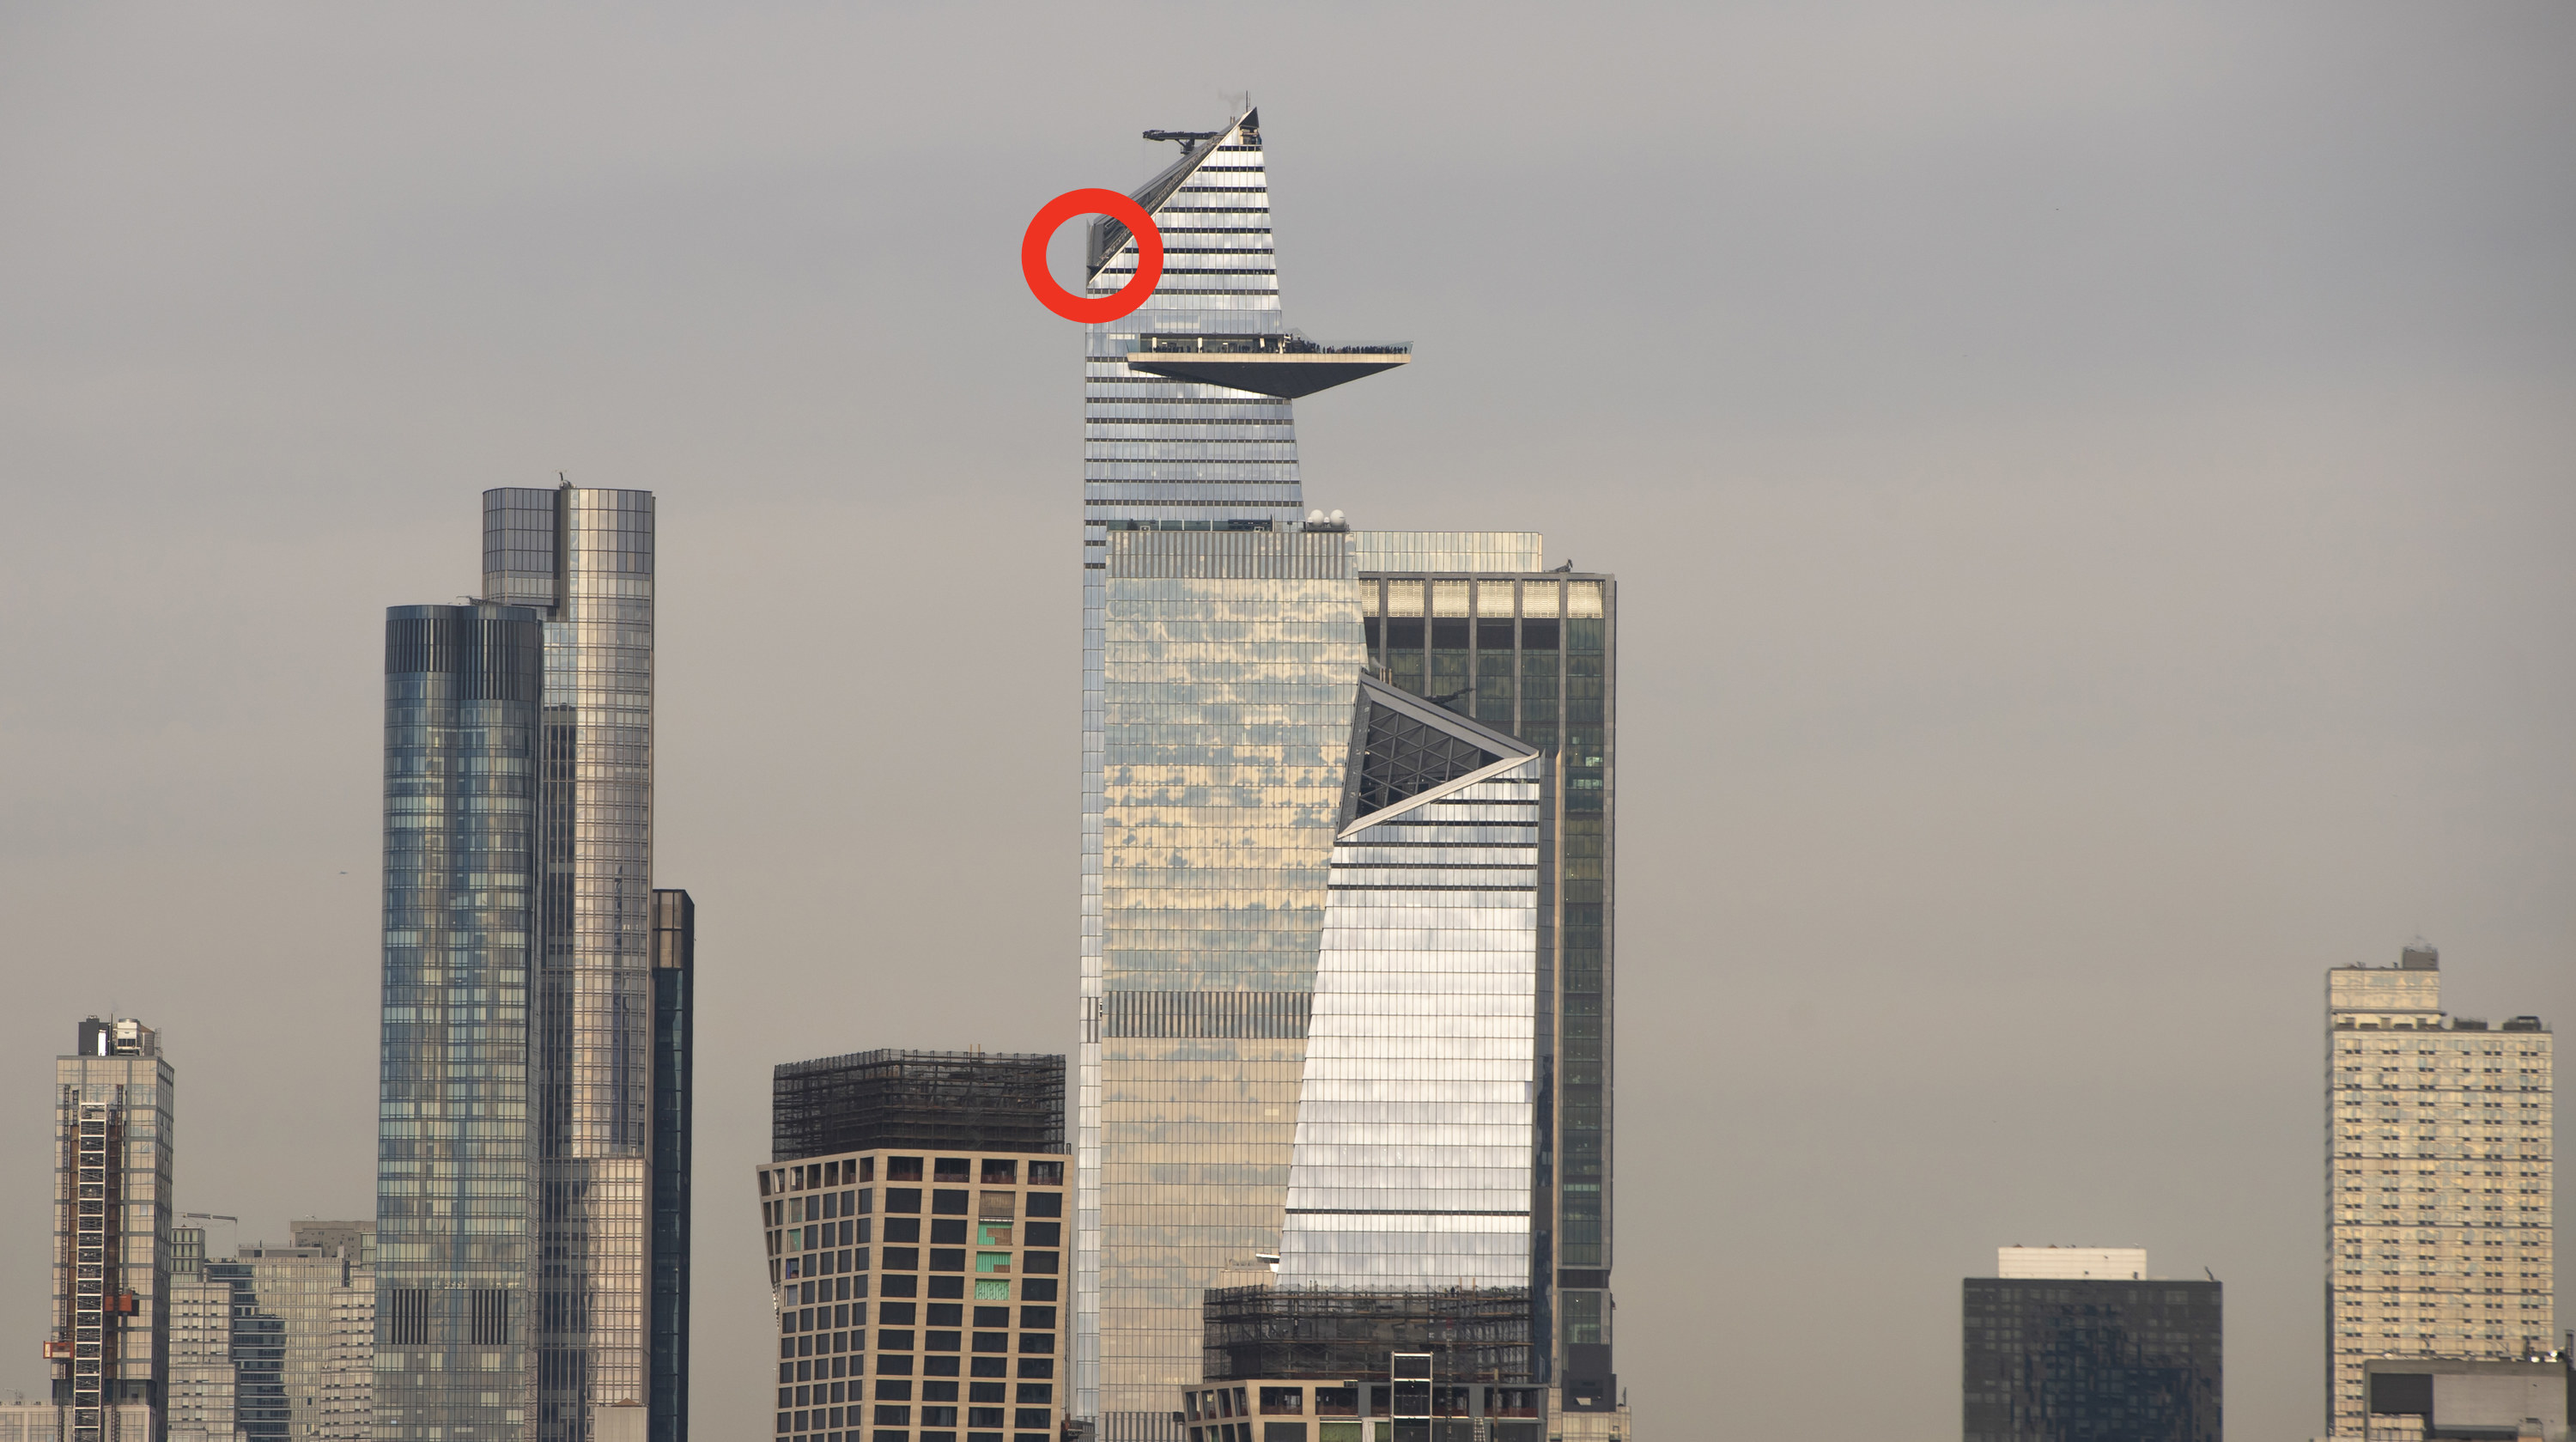 A wide view of the skyscraper, with the area at the start of the vertical climb circled